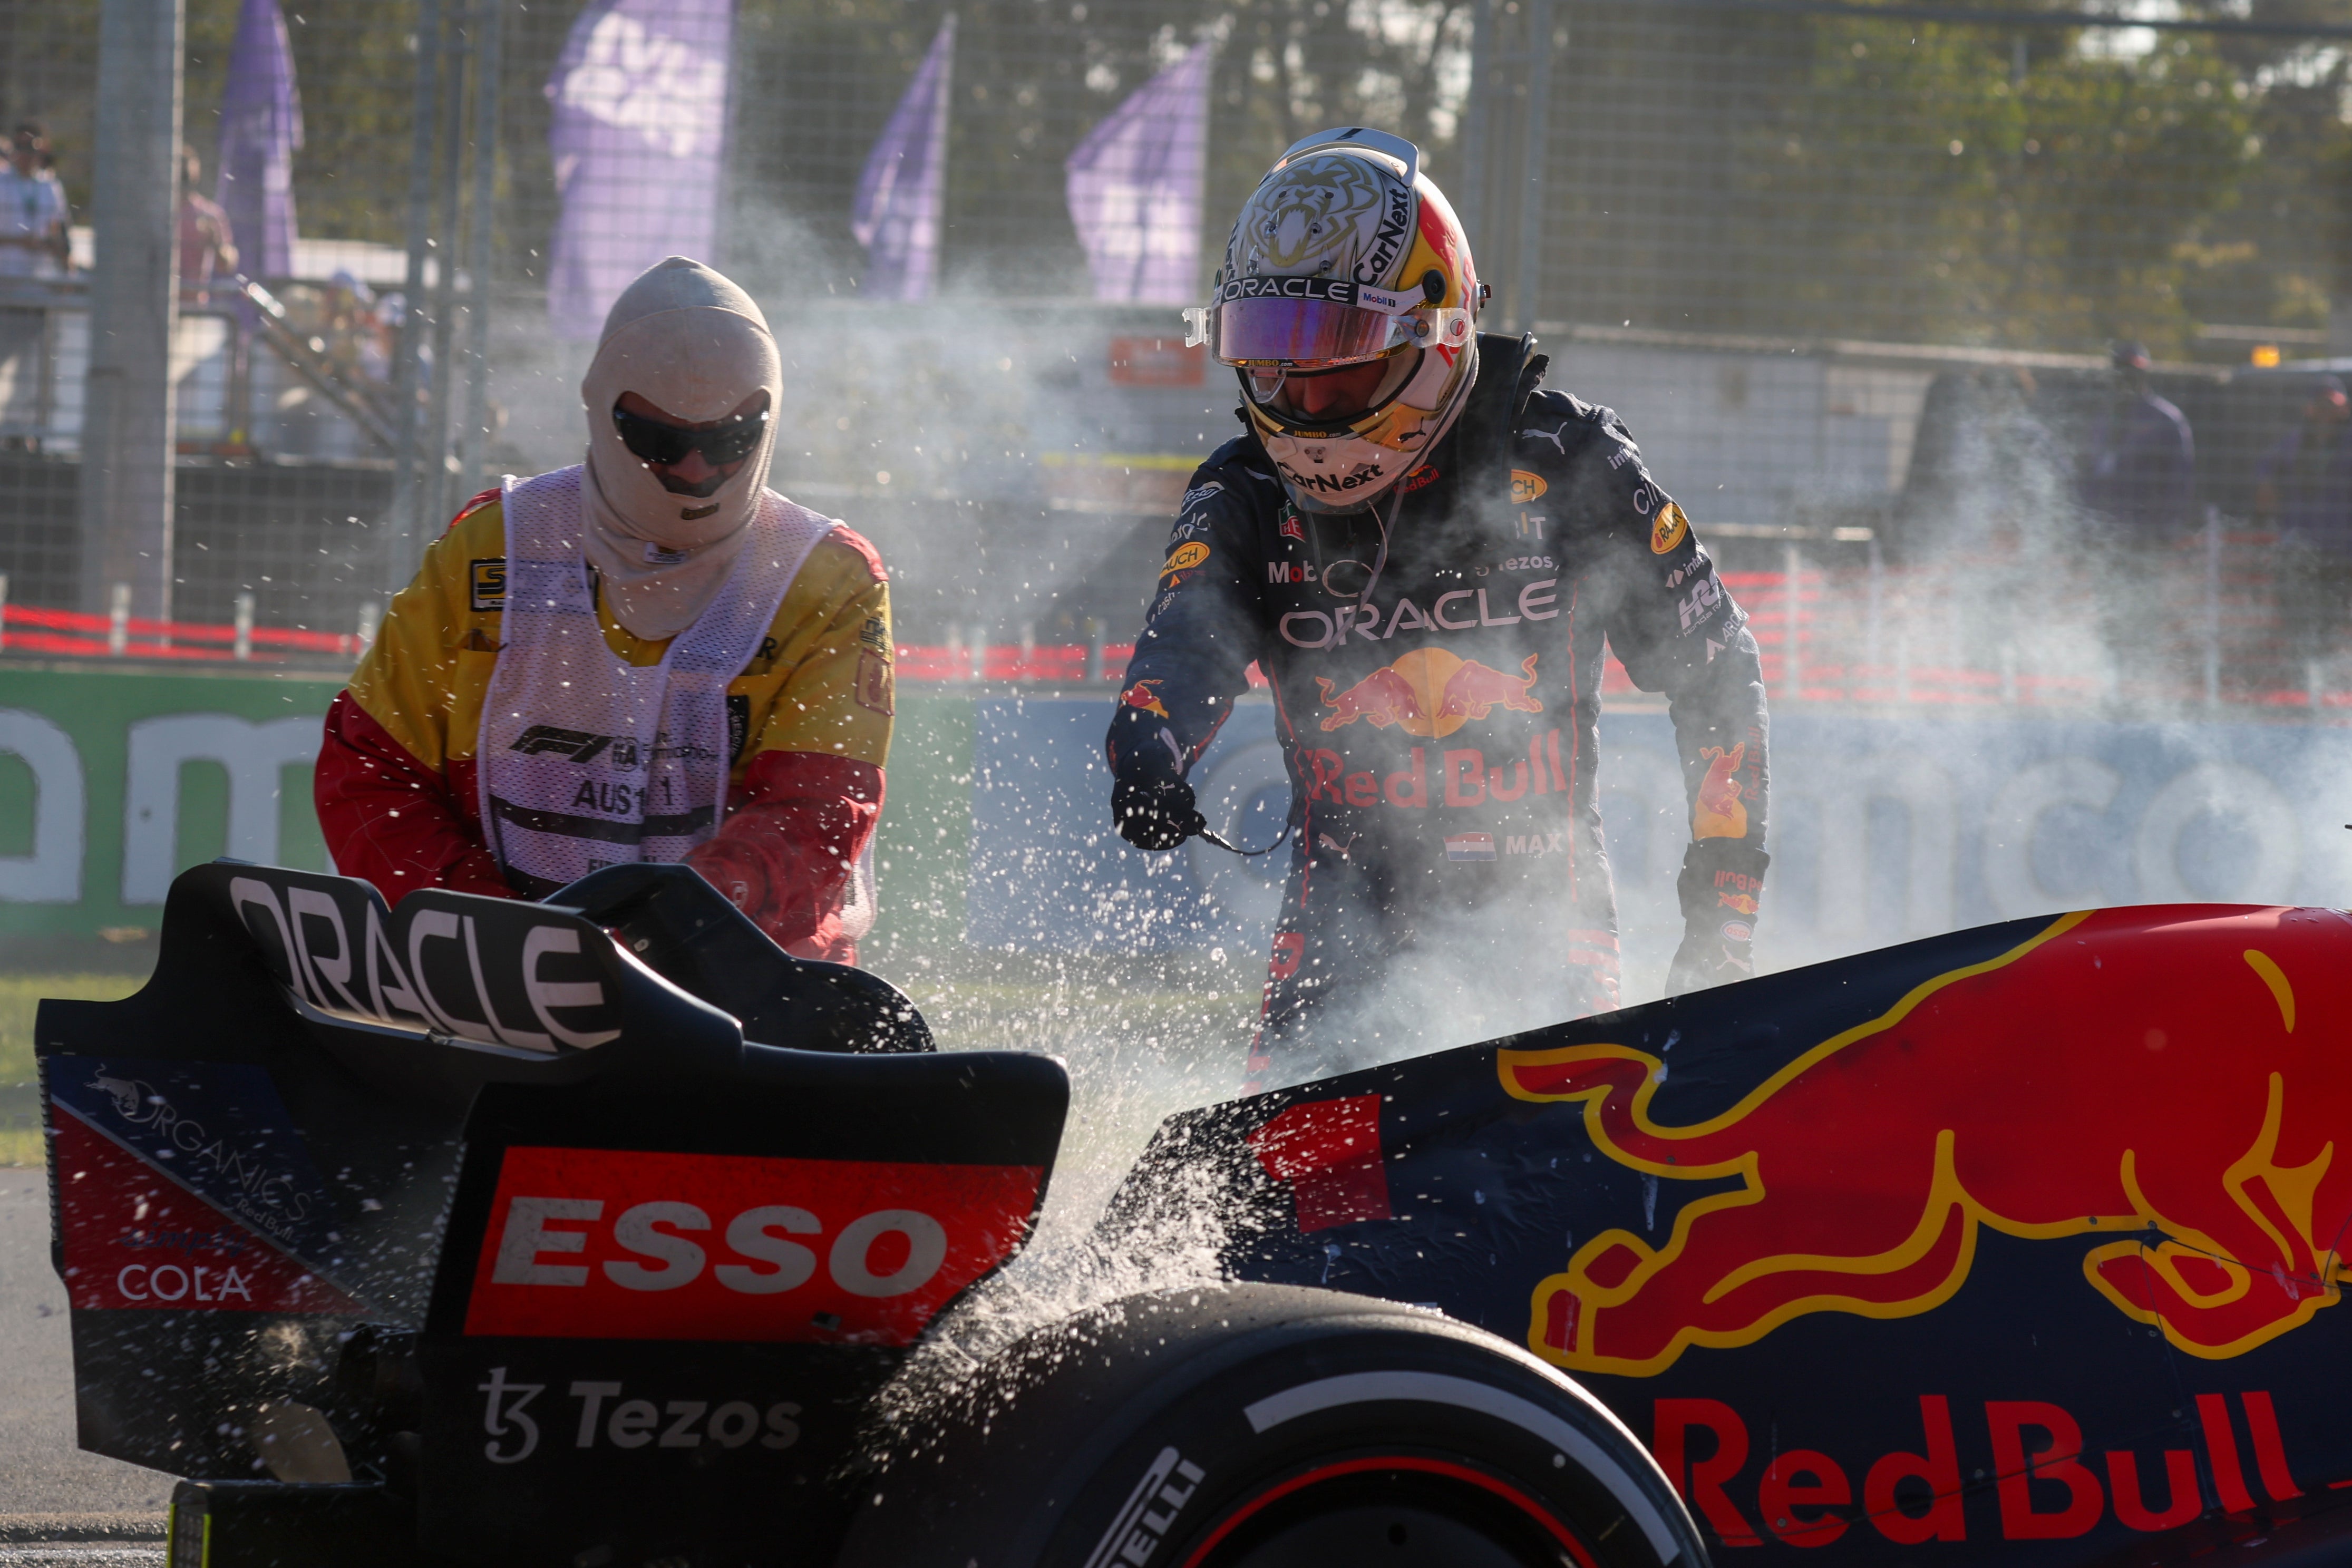 Red Bull’s Max Verstappen looks on as a fire in his car is extinguished during the Australian Grand Prix in Melbourne, which was won by Ferarri’s Charles Leclerc